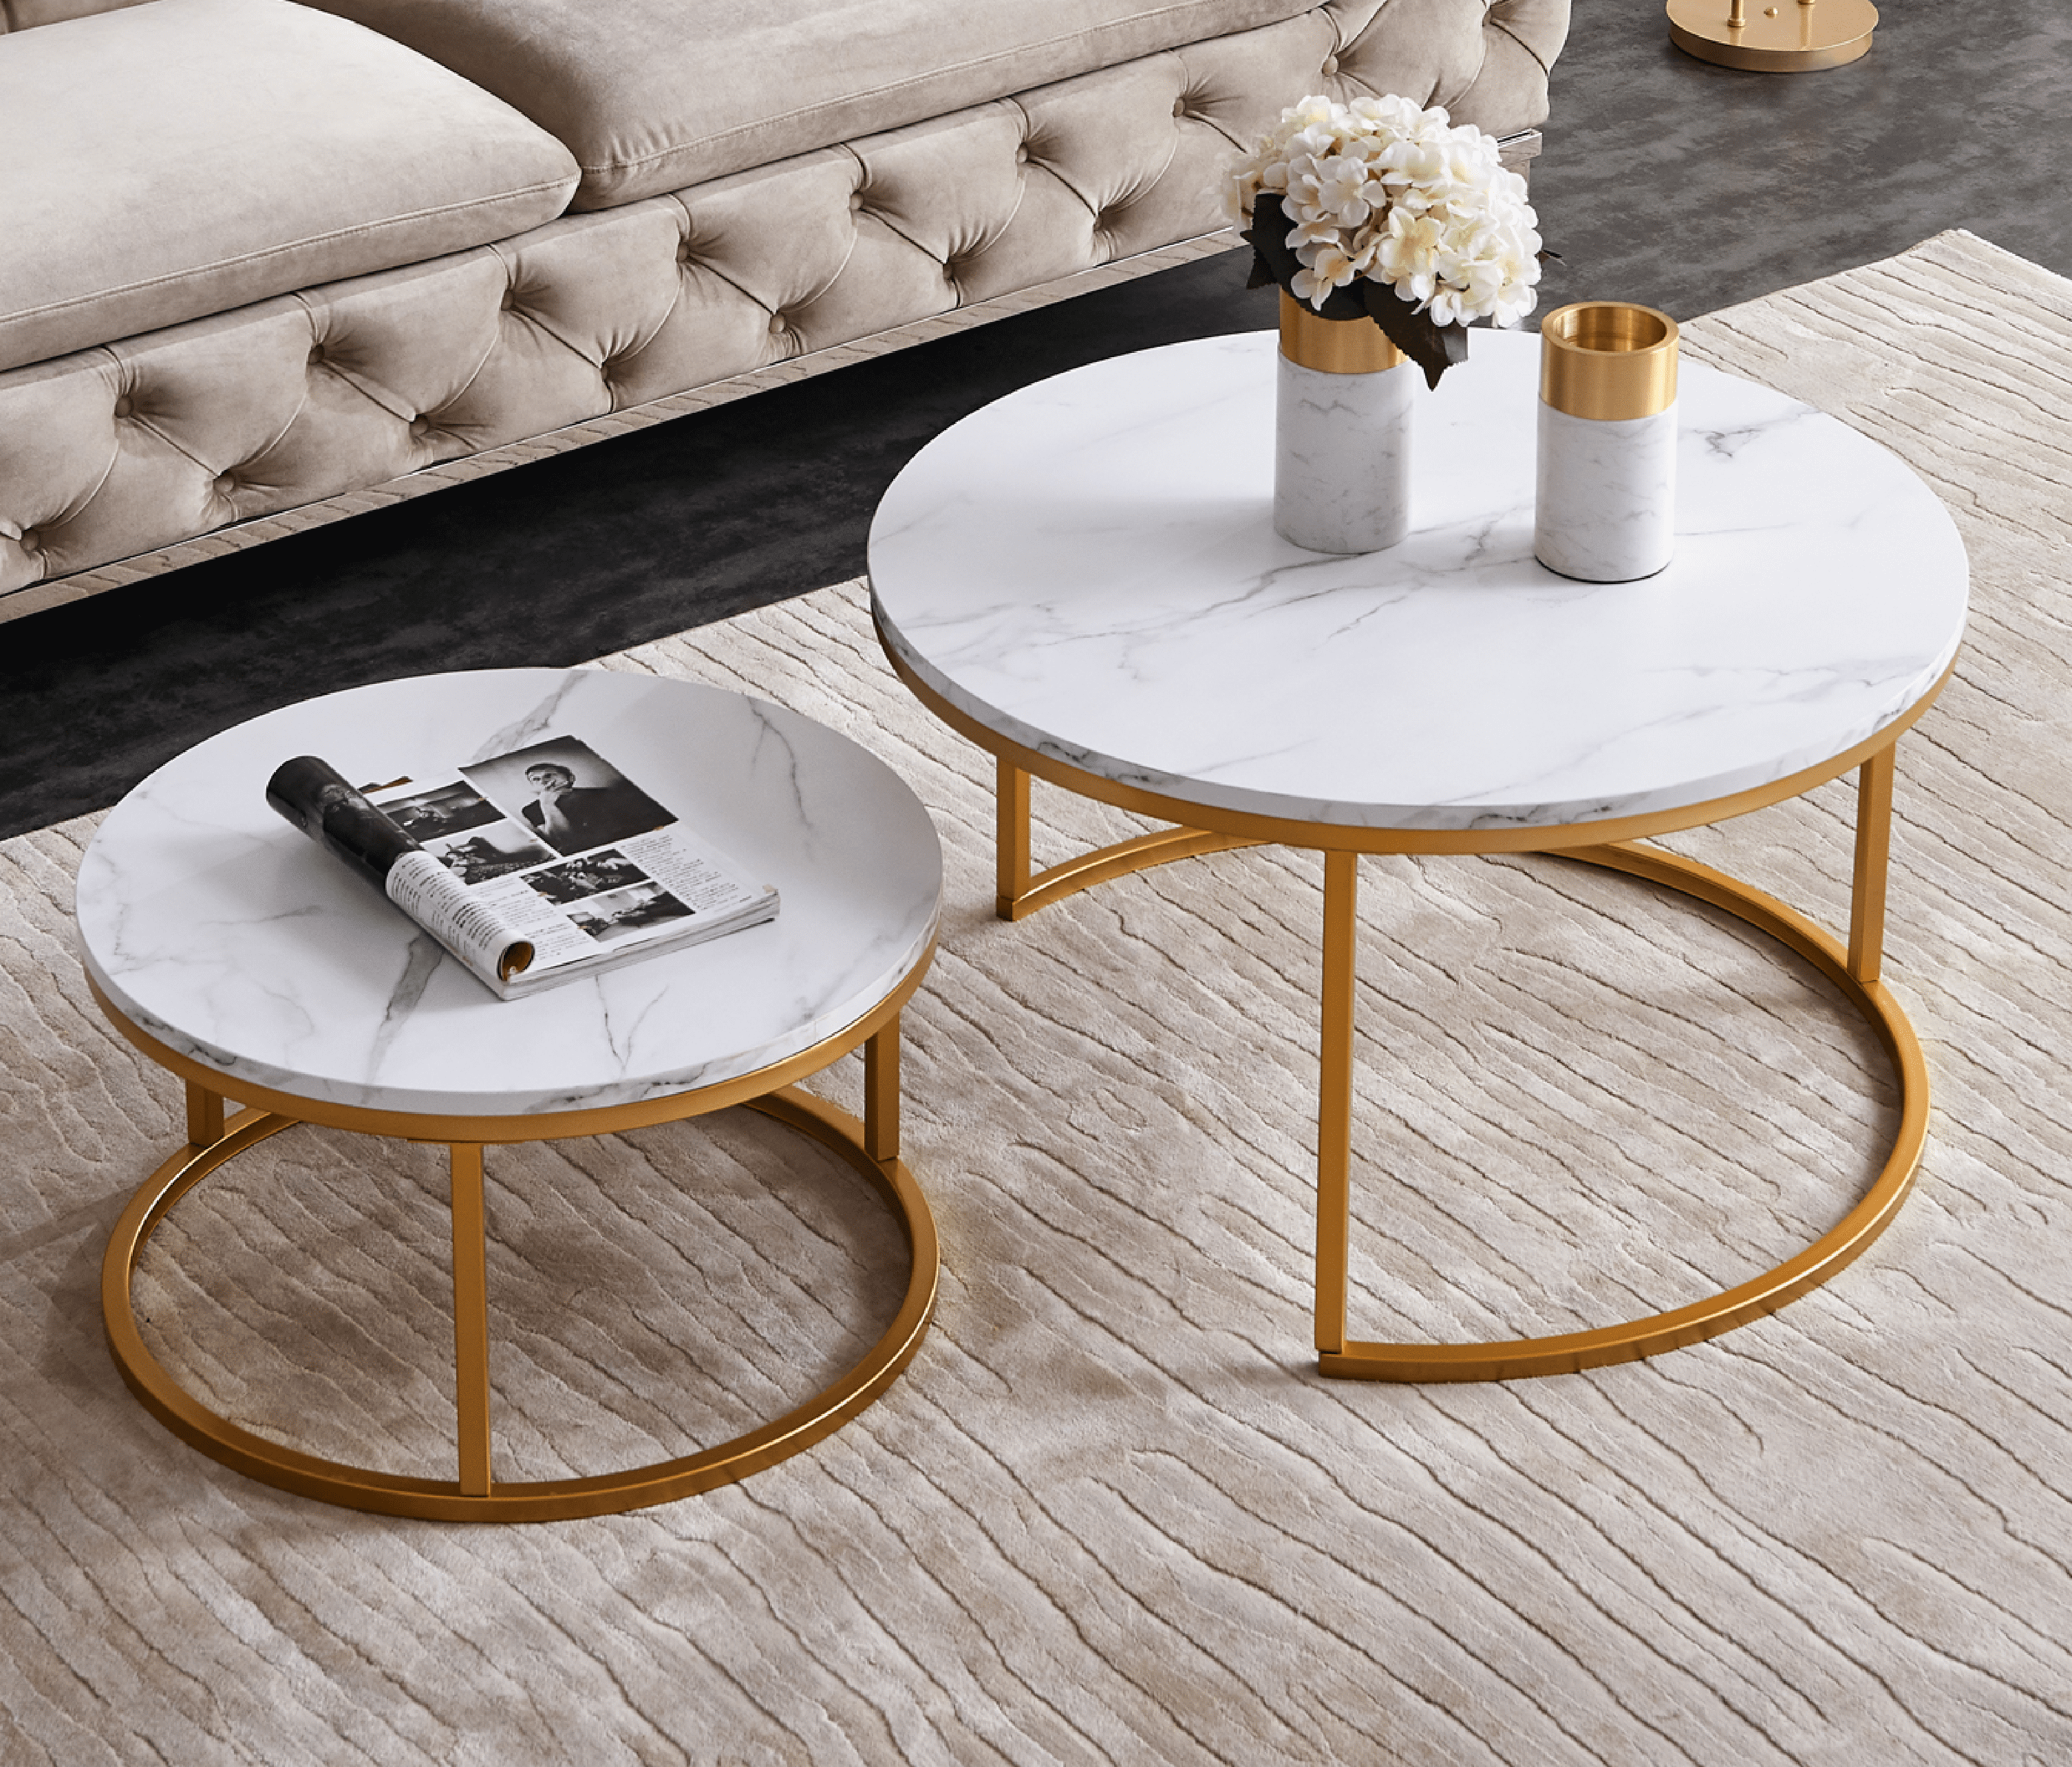 Top-32” Modern Nesting Coffee Table Simple Modern Living Room -2 Round  Table Sets(1*Big+1*Small) Gold